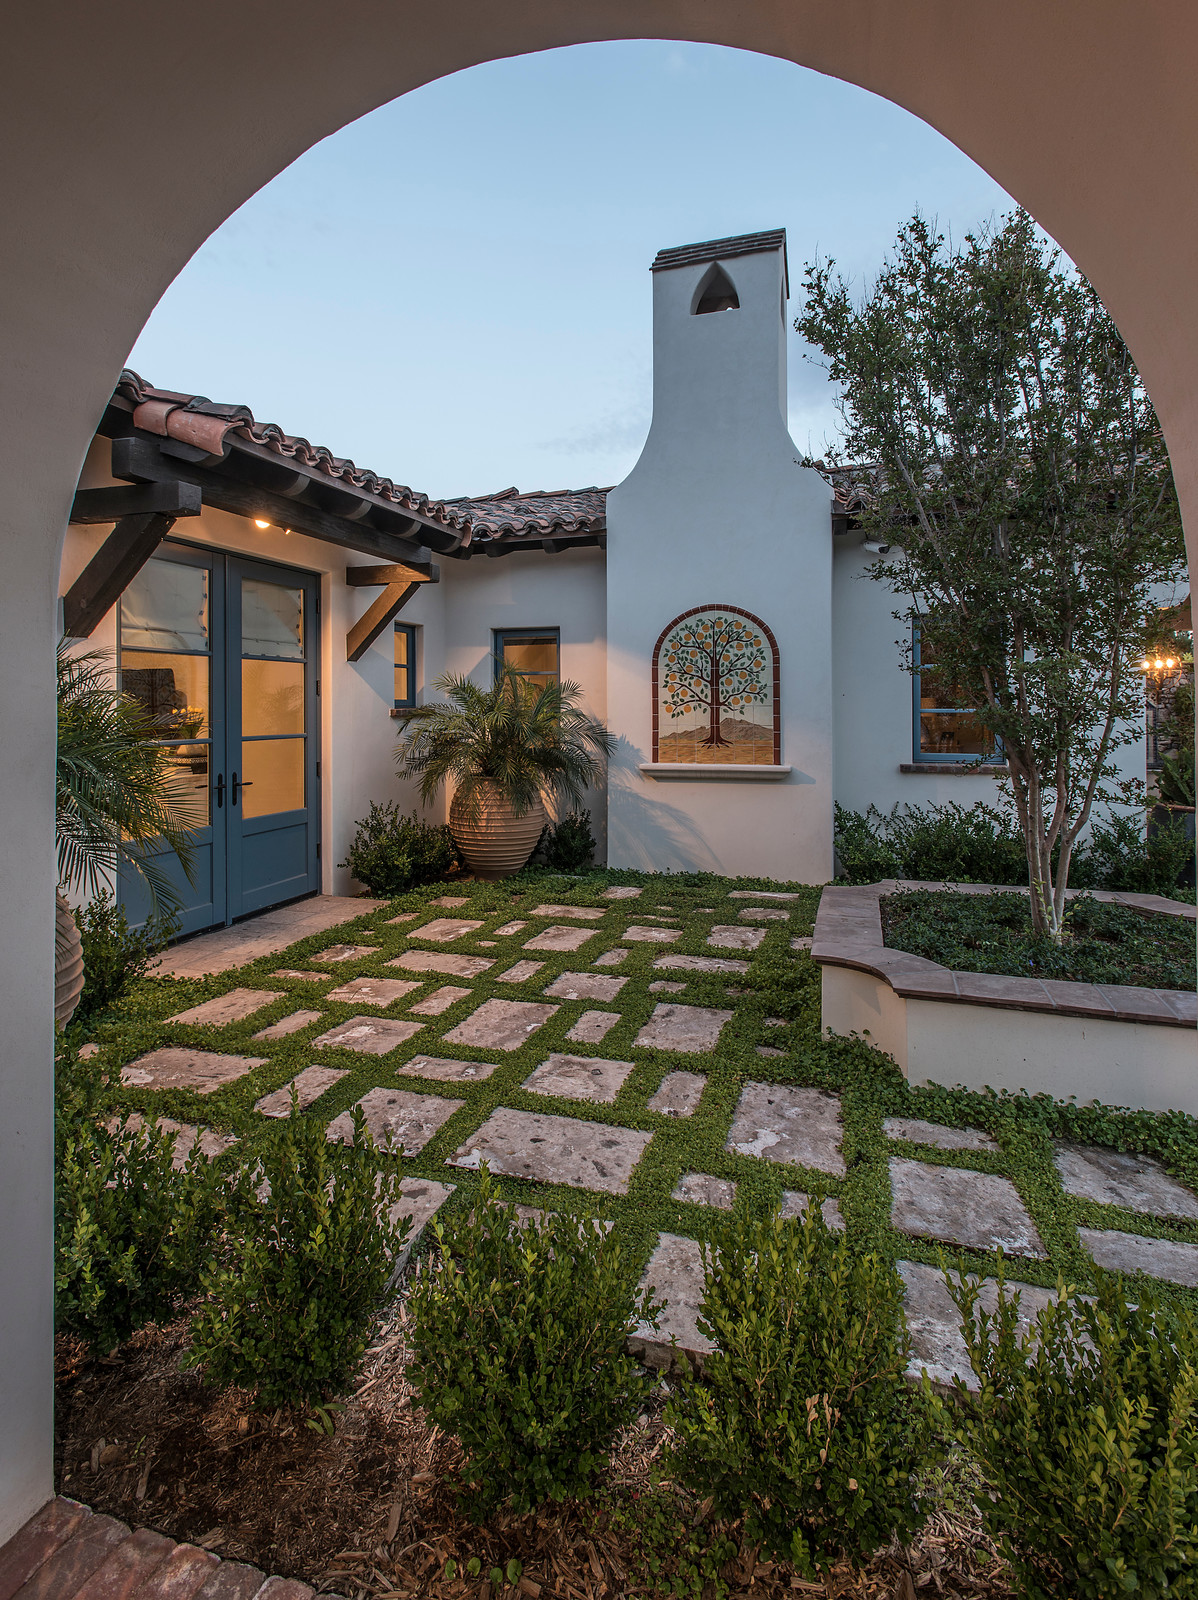 15 Most Appealing Spanish Style Homes With Courtyards To Create An